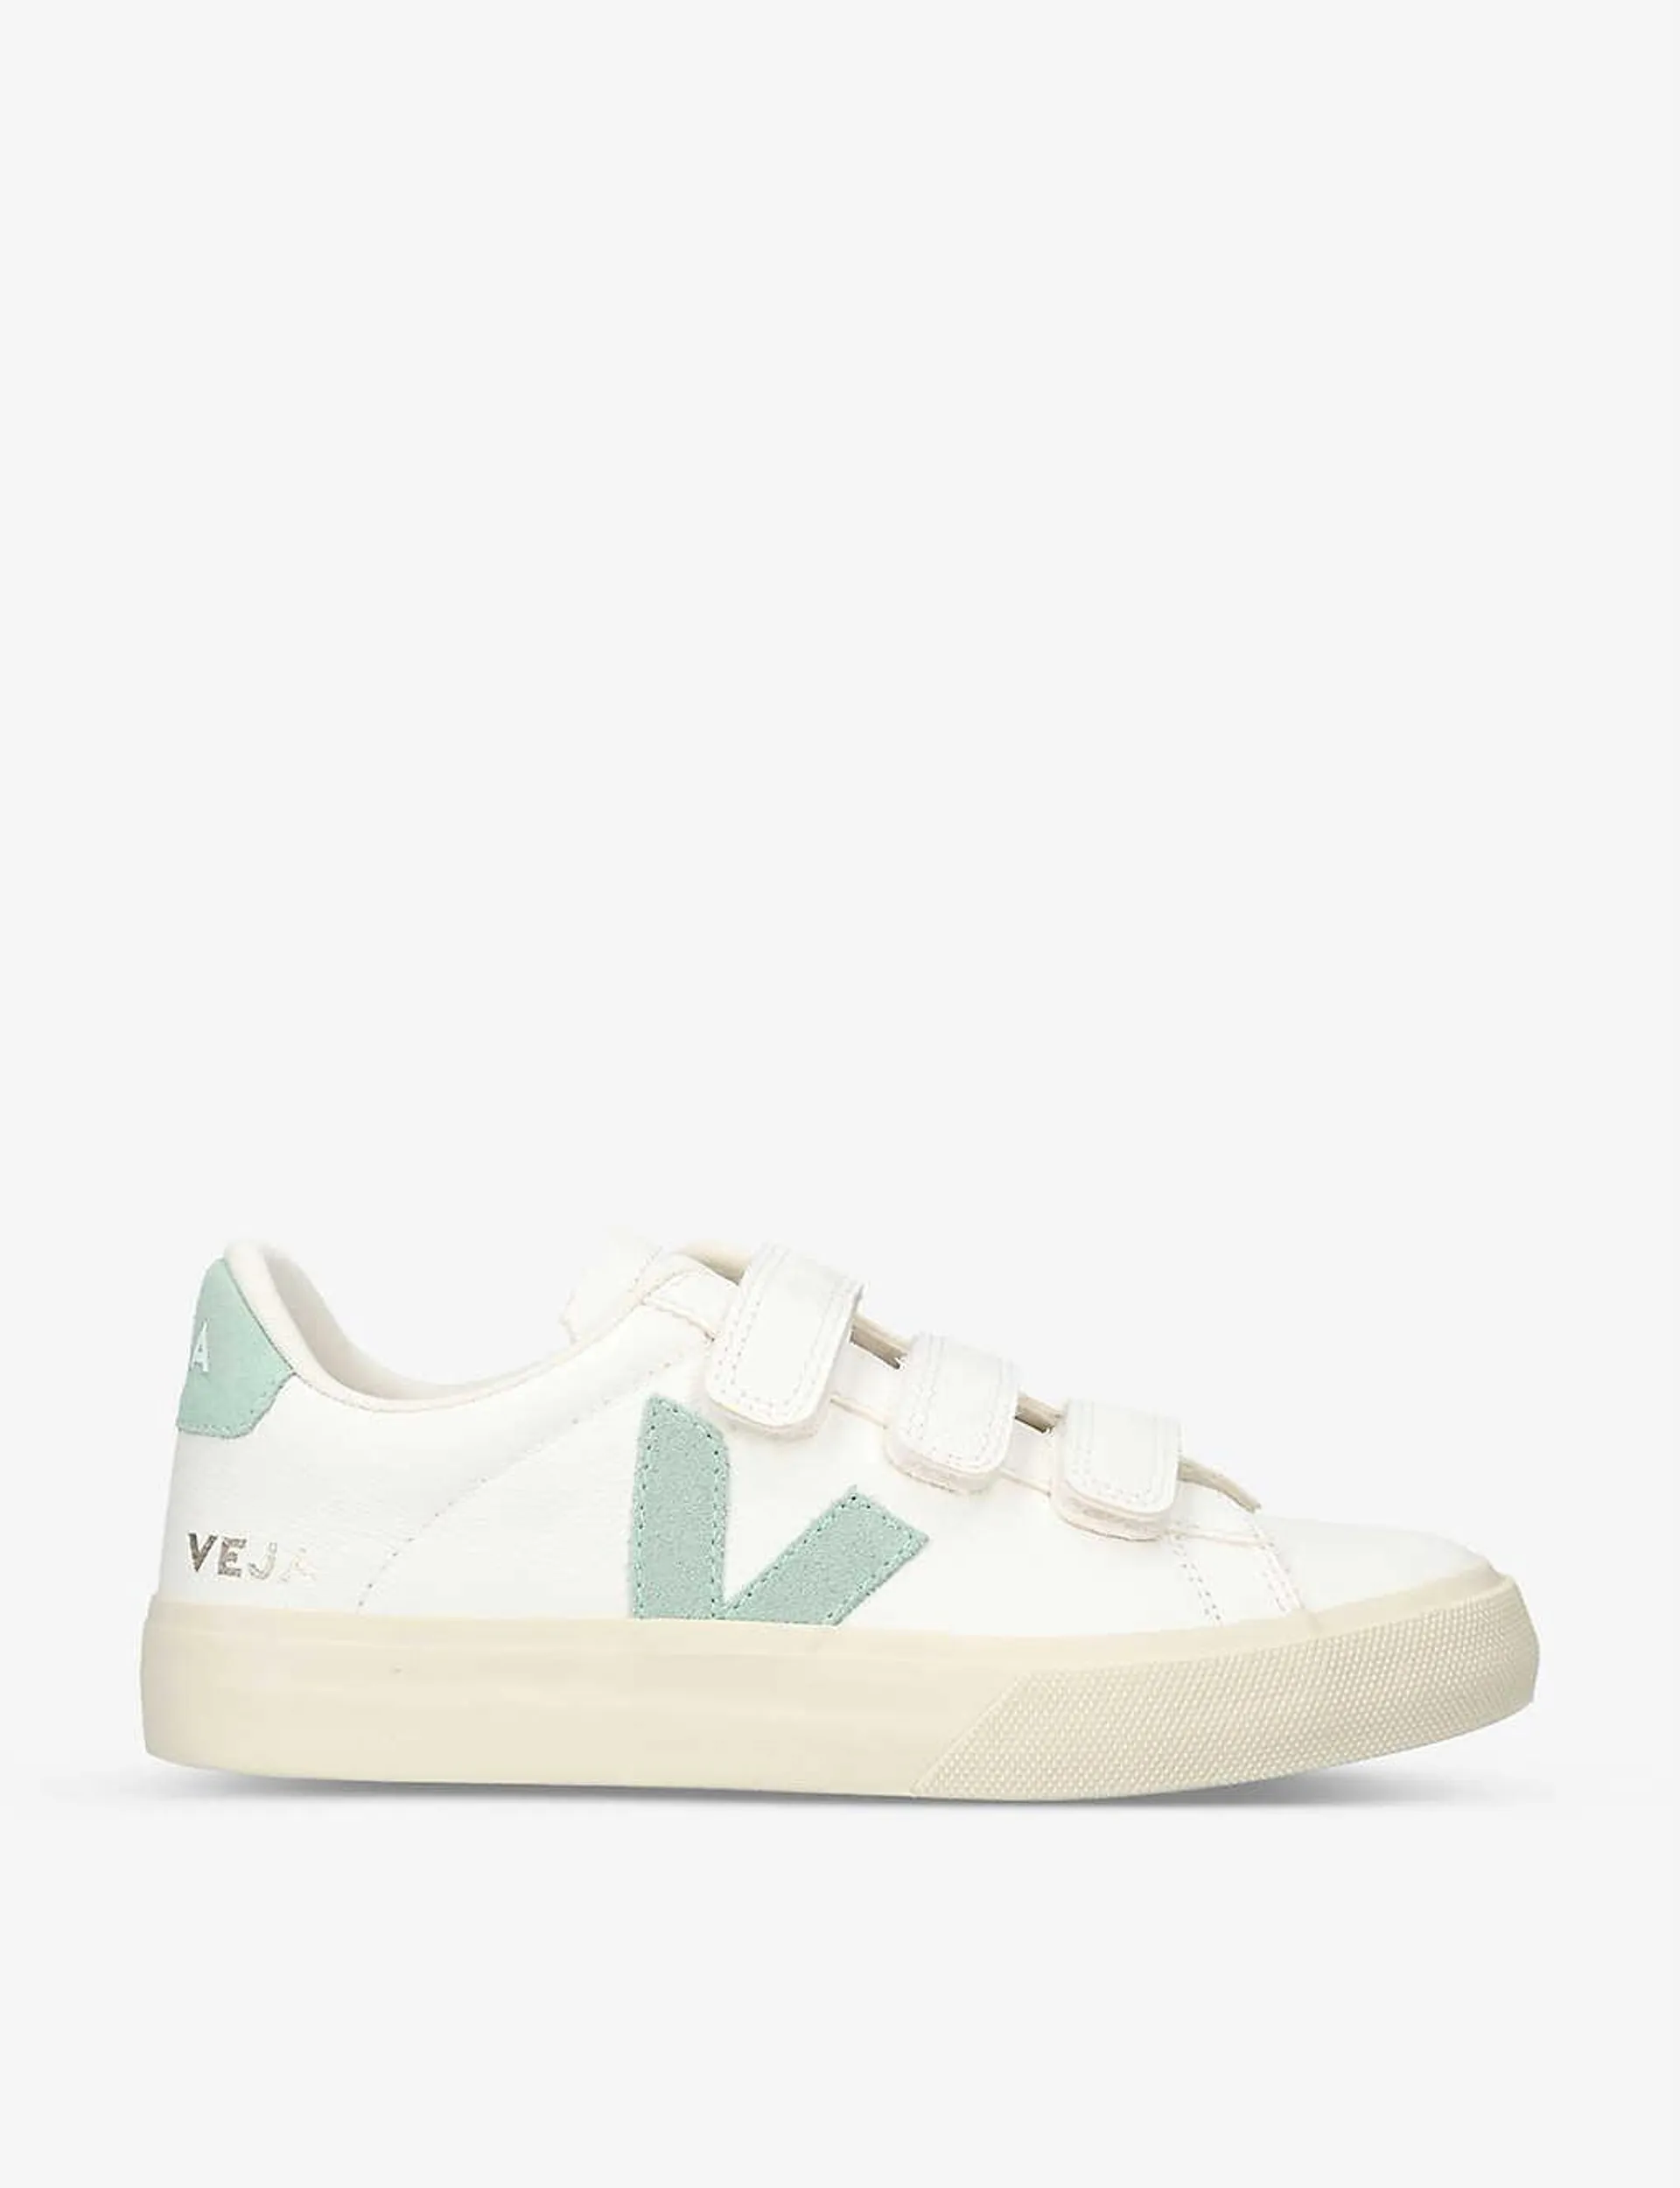 Women's Recife branded leather trainers